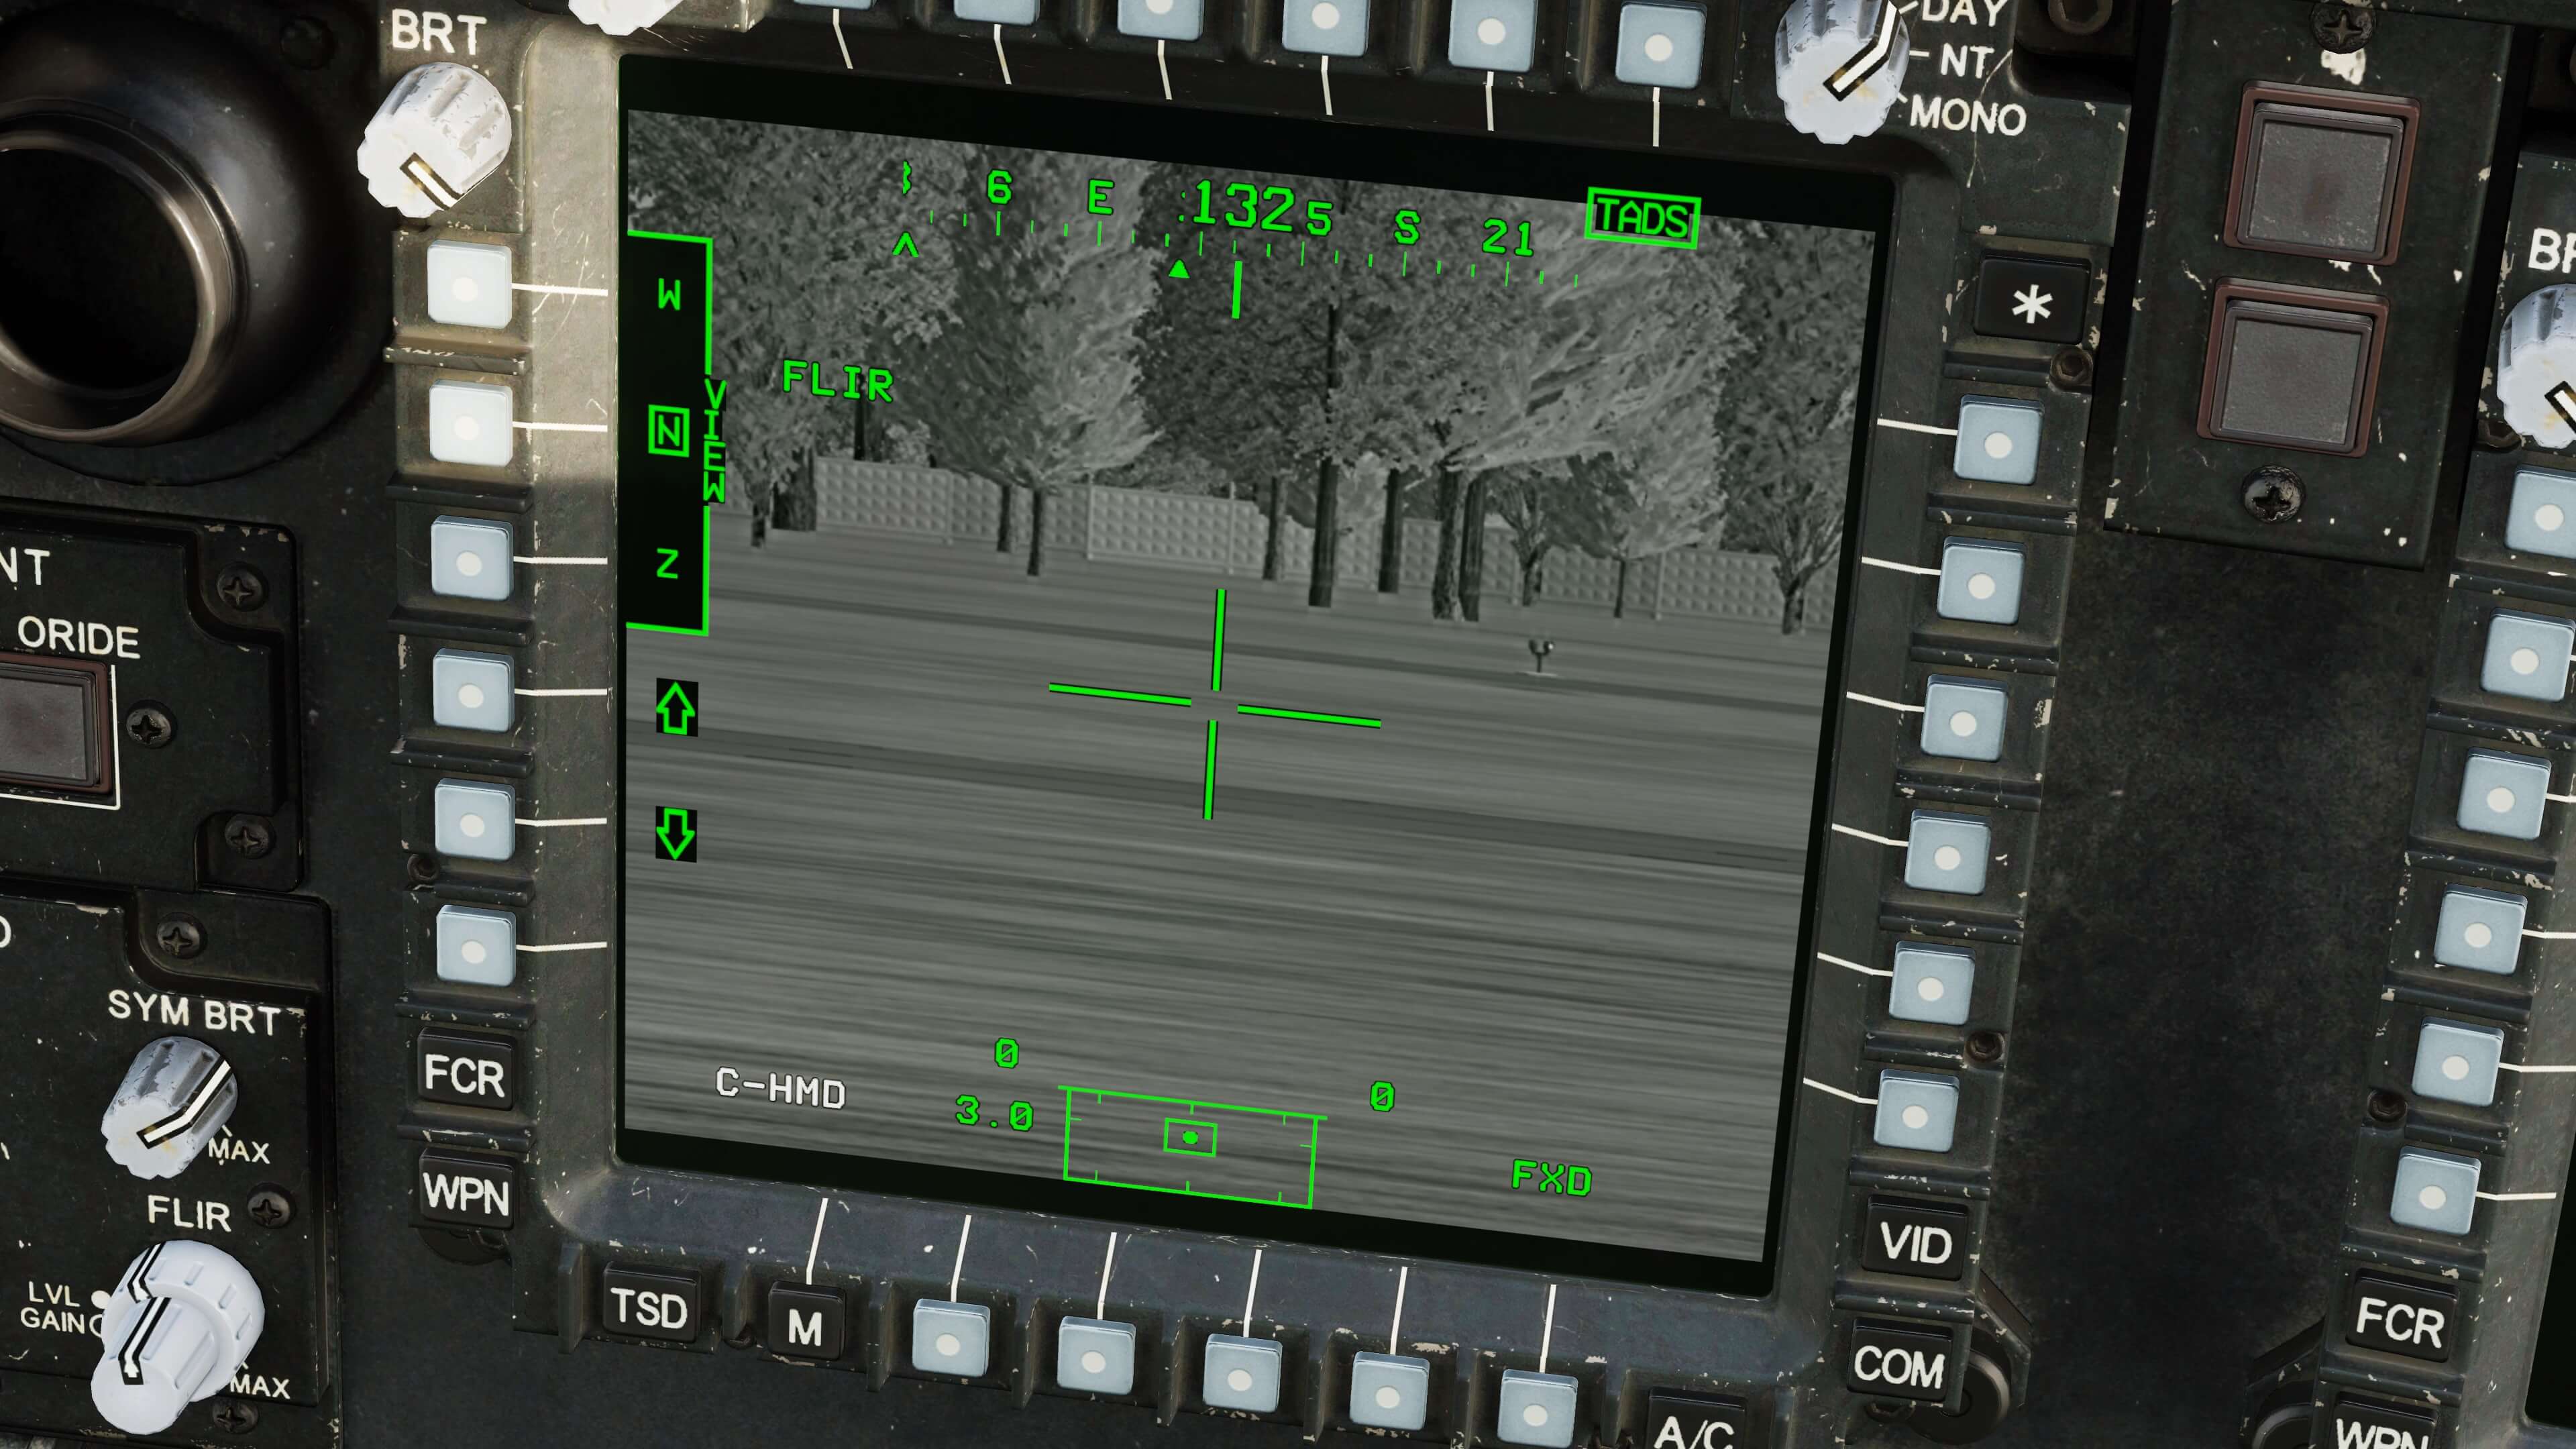 Keybinds for TADS Zoom/FLIR/TV from Pilot Seat